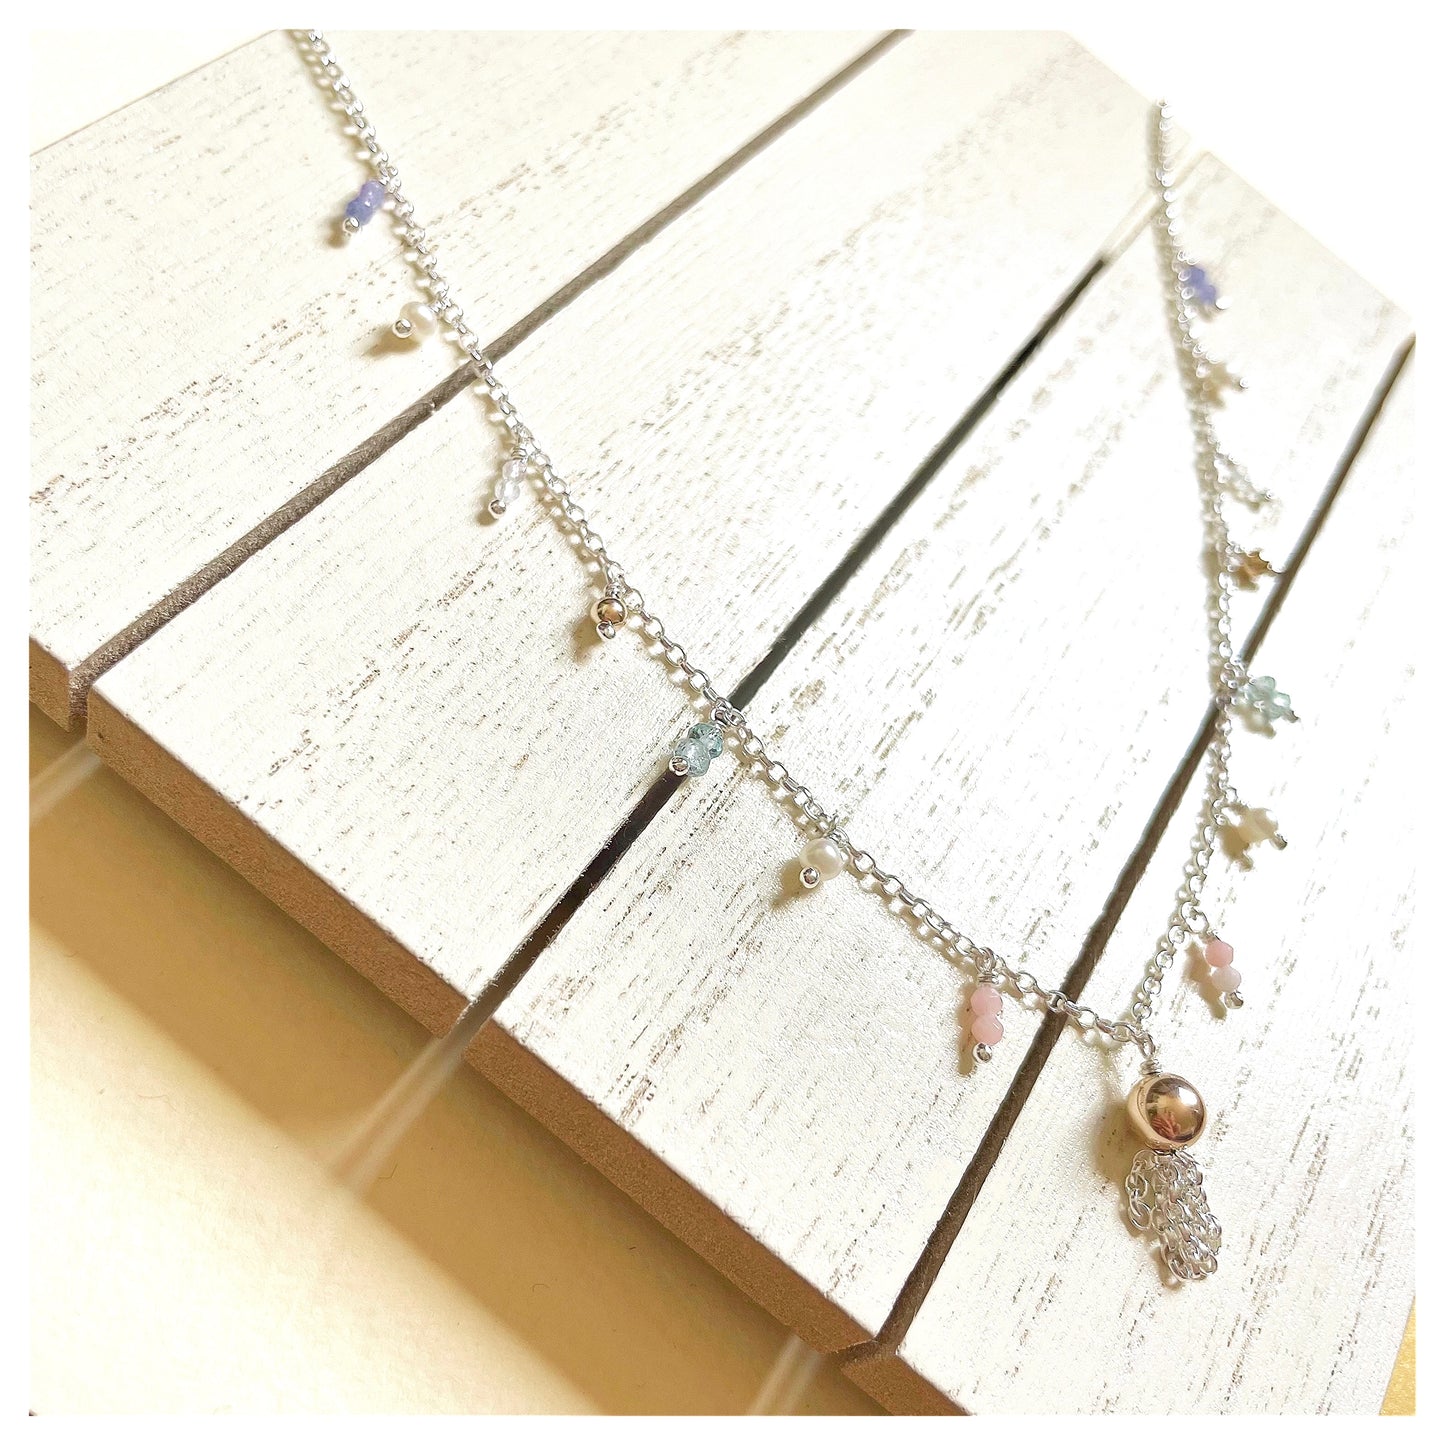 9ct Yellow Gold, Sterling Silver and Pastel Gemstone Mix Beaded Tassel Necklace.